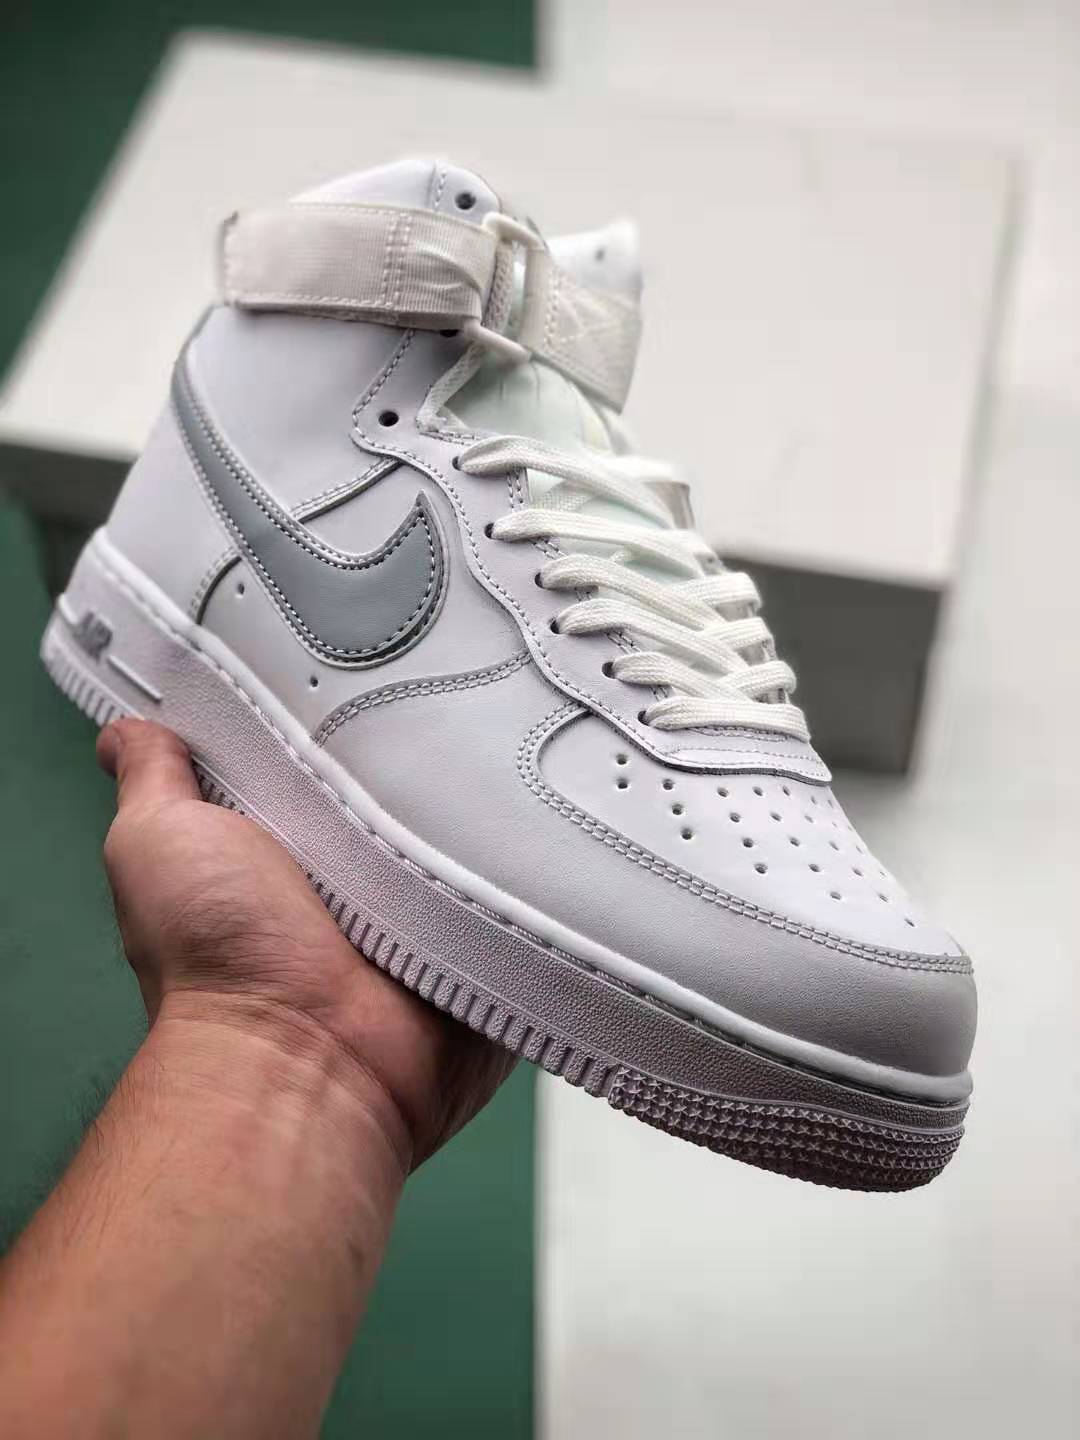 Nike Air Force 1 High '07 'White Wolf Grey' AT4141-100 - Stylish and Versatile Sneakers